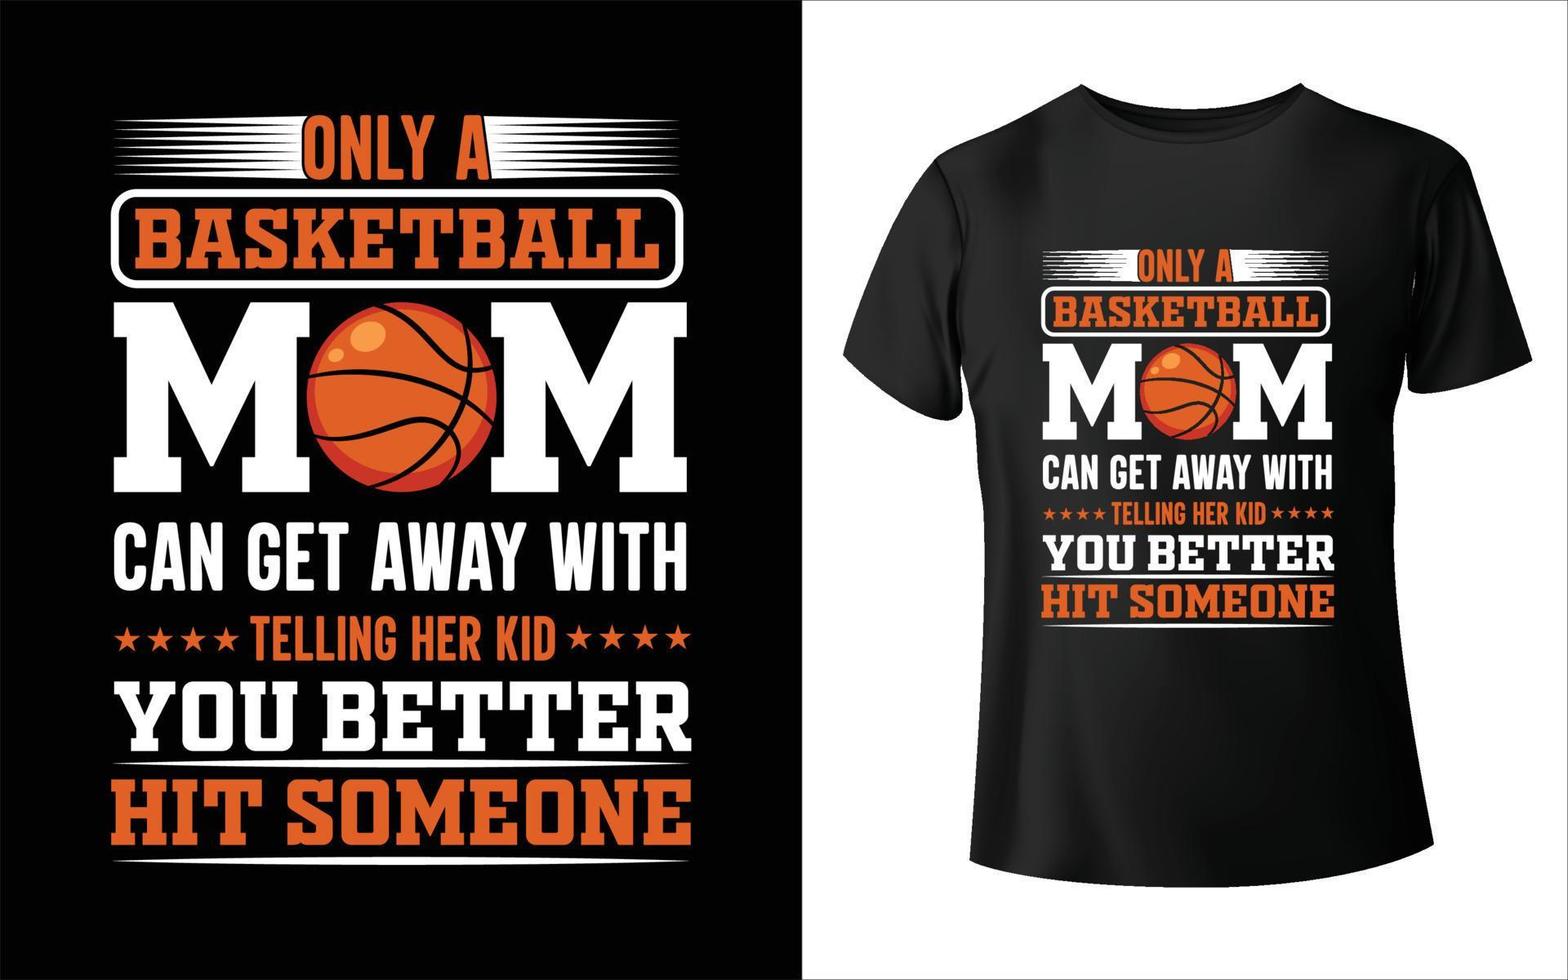 Only basketball mom can get away with telling her kid t-Shirt Design t-shirt design - Vector graphic, typographic poster, vintage, label, badge, logo, icon or t-shirt